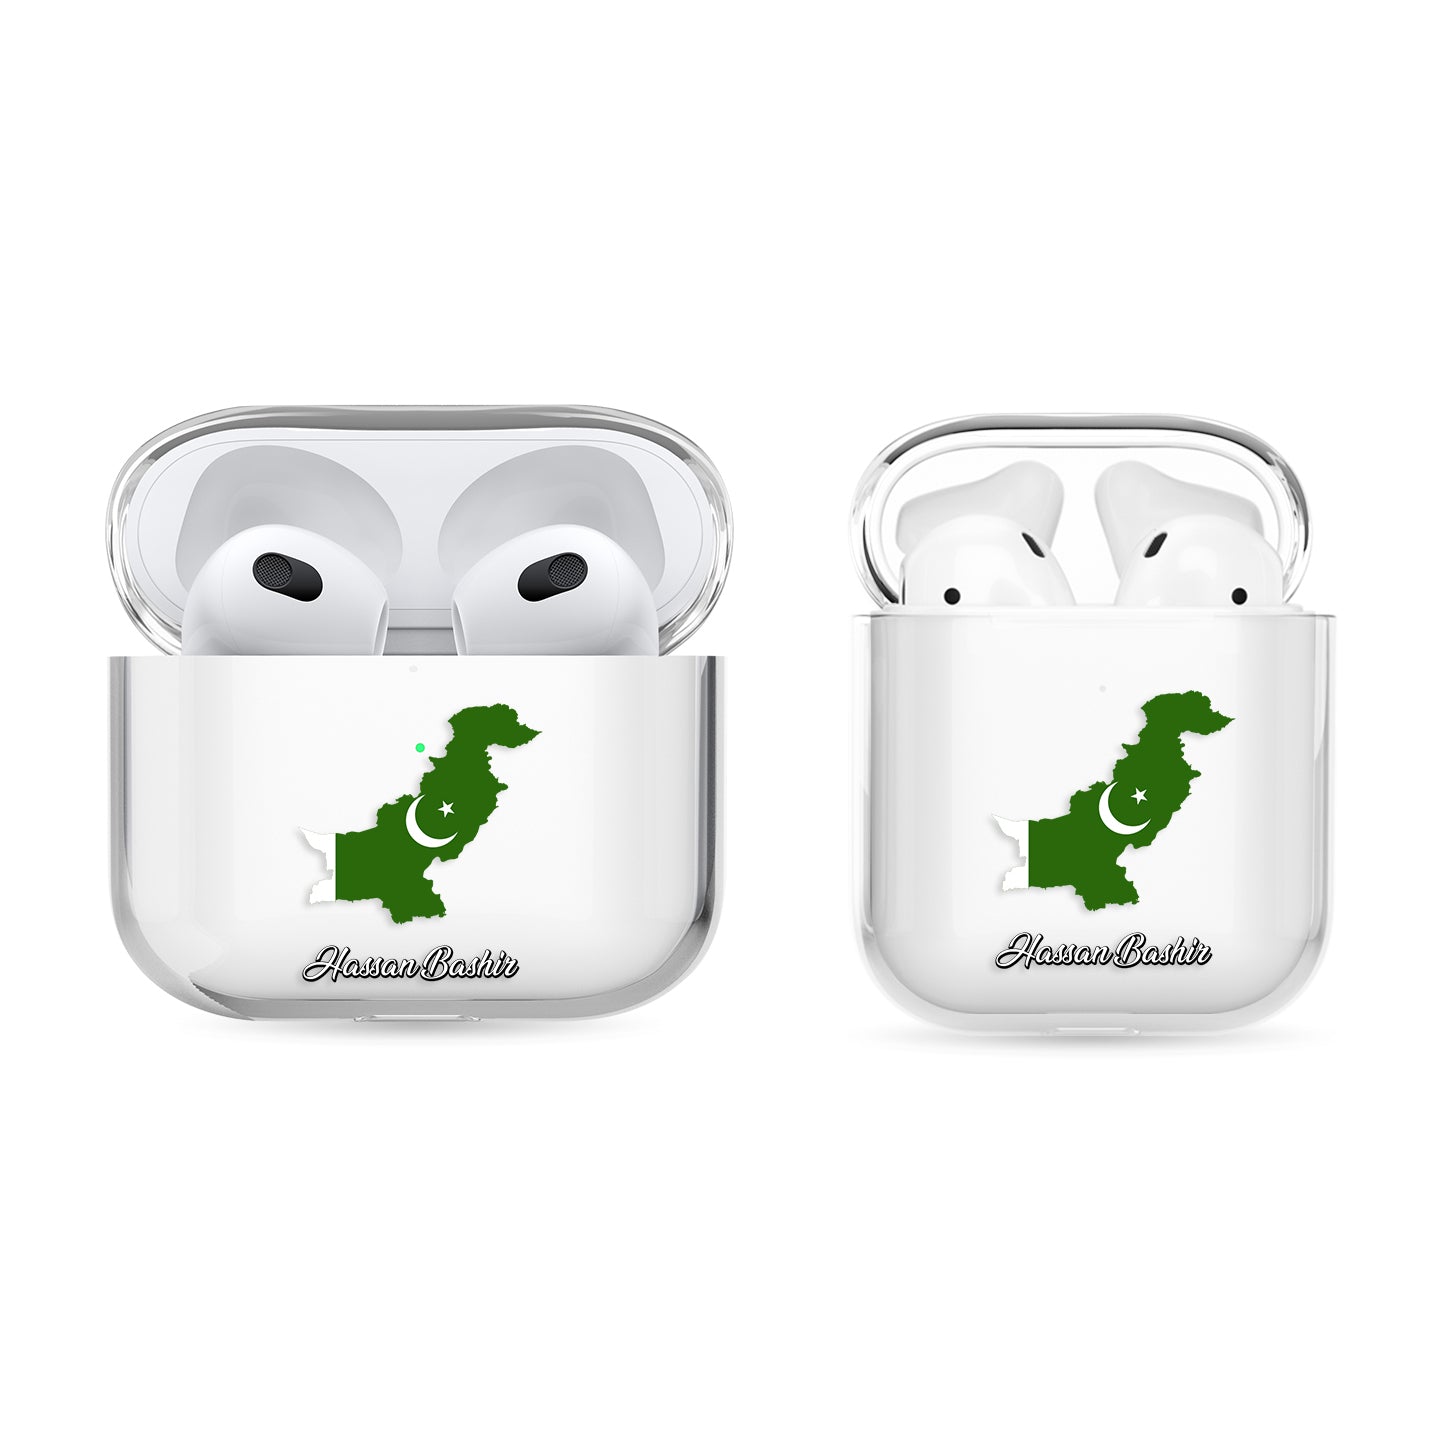 Airpods Hülle - Pakistan Flagge - 1instaphone